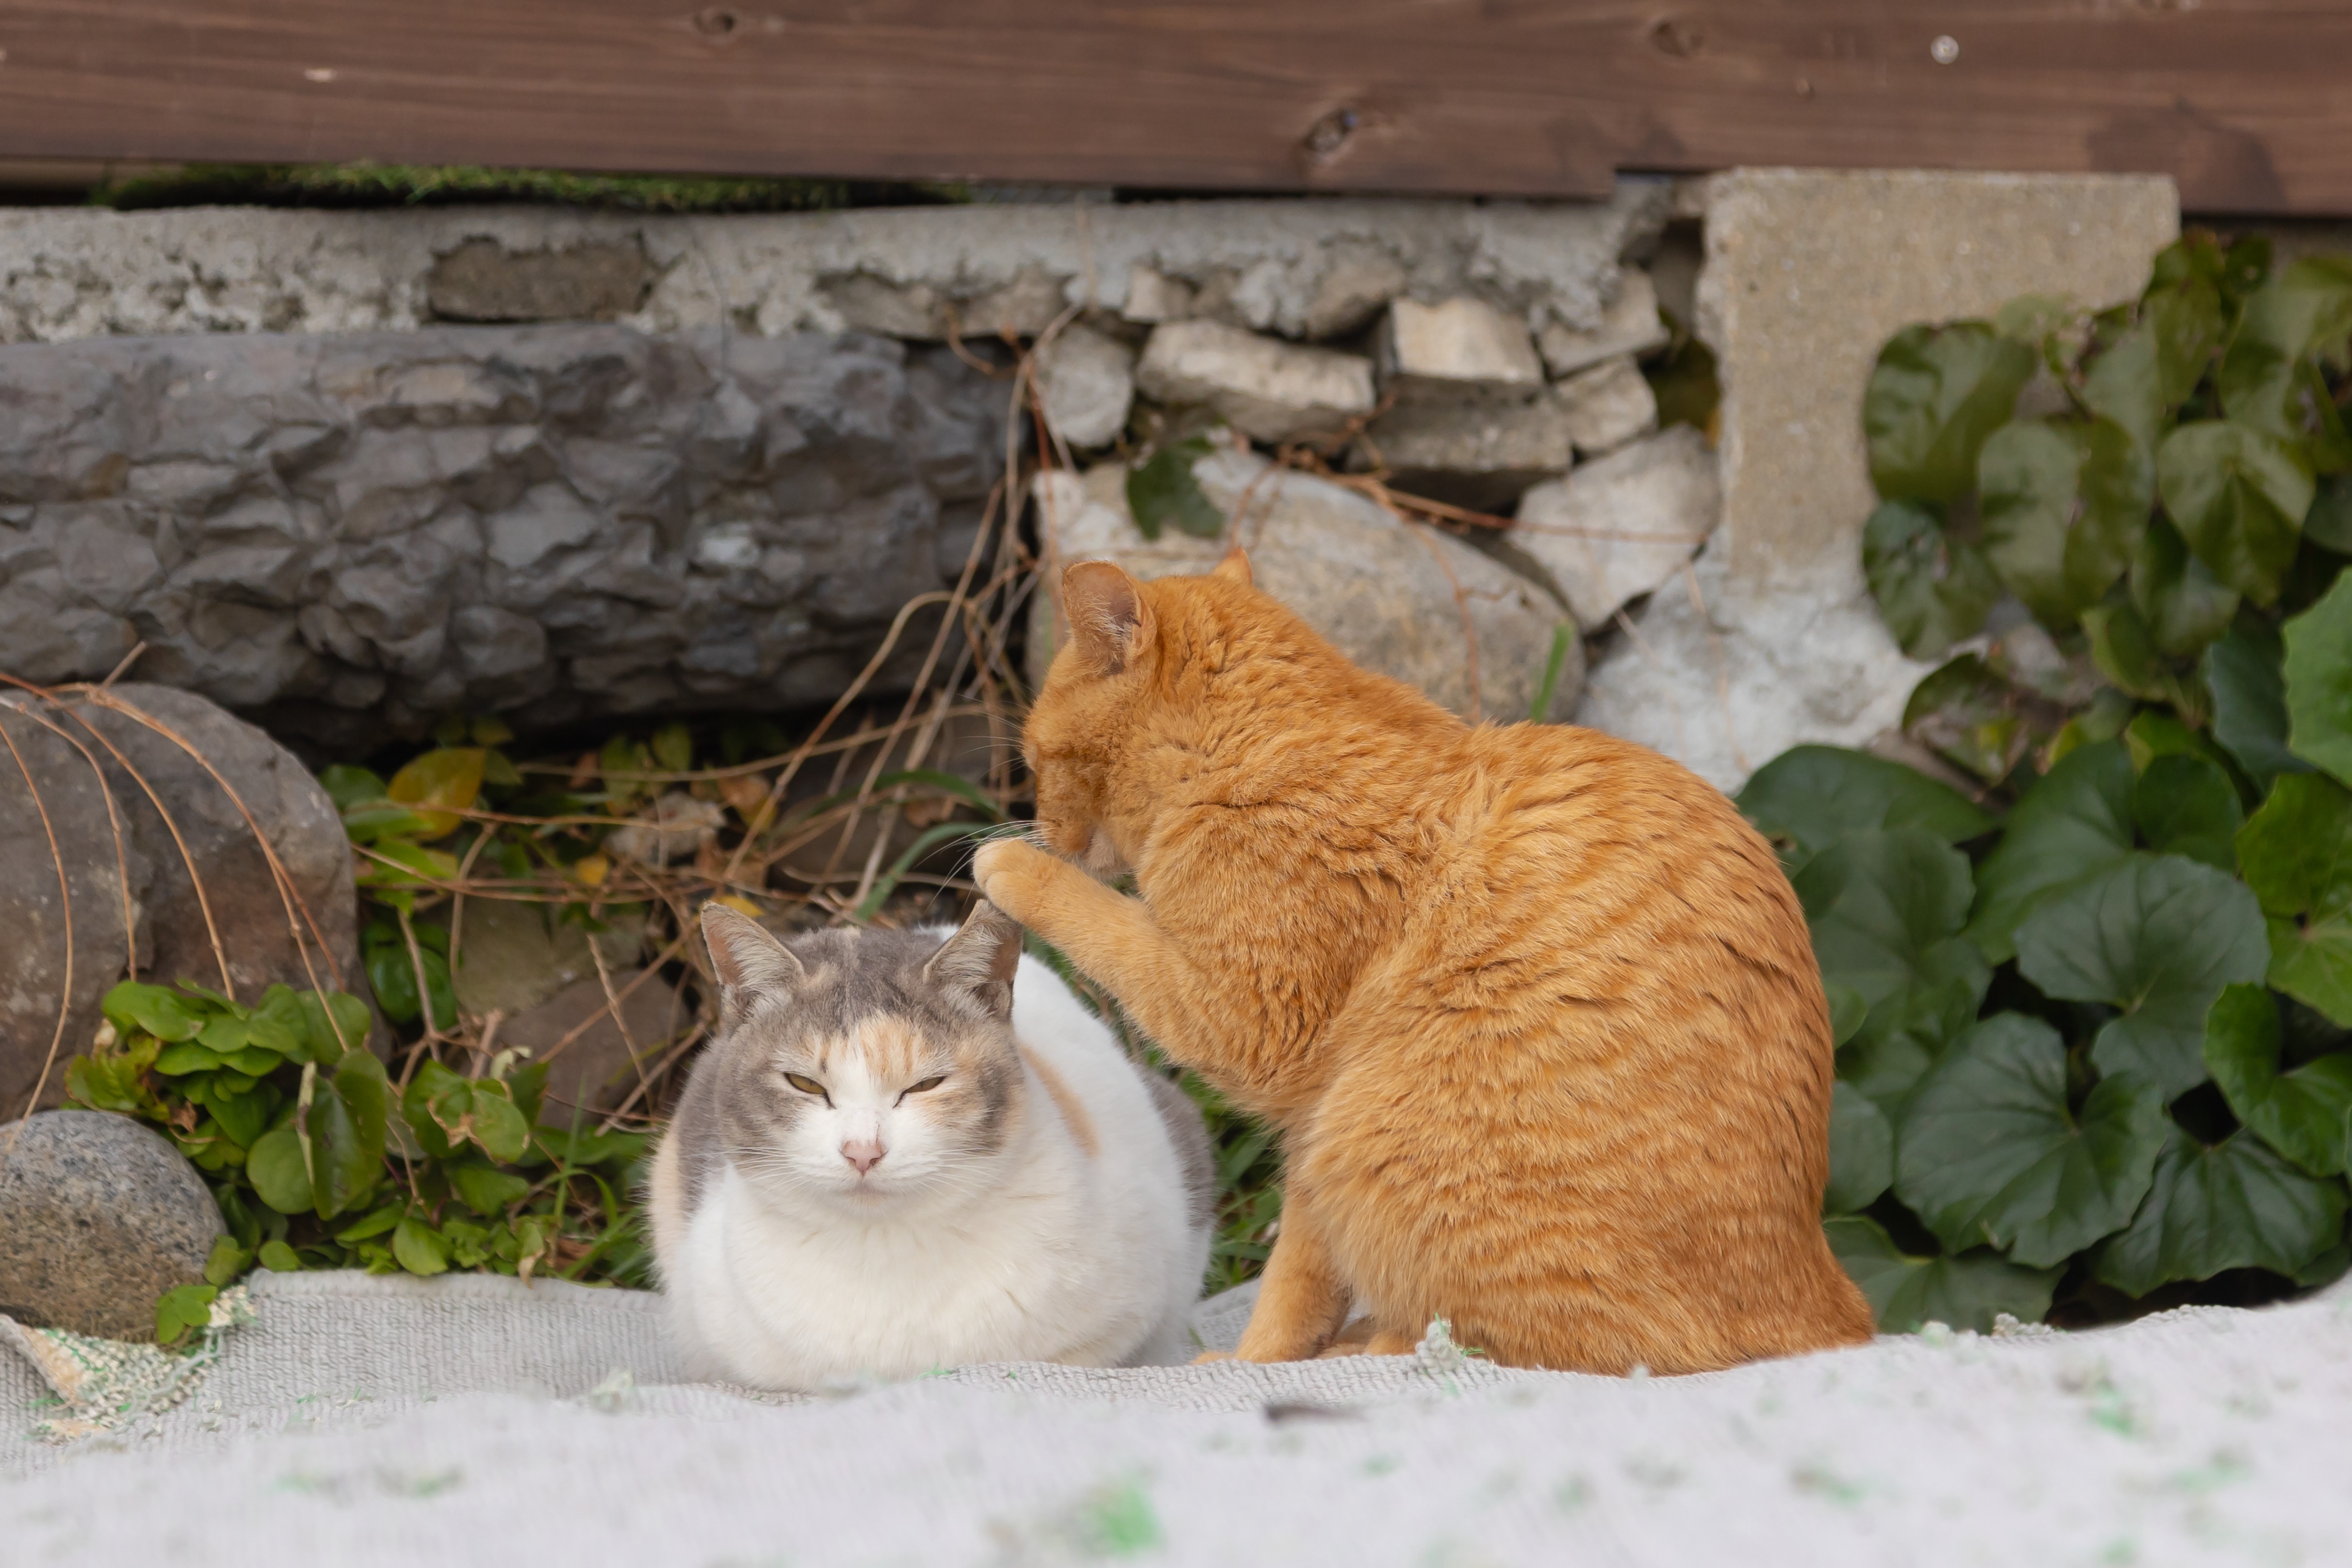 A ginger cat looks like it's whispering something into the ear of a white cat